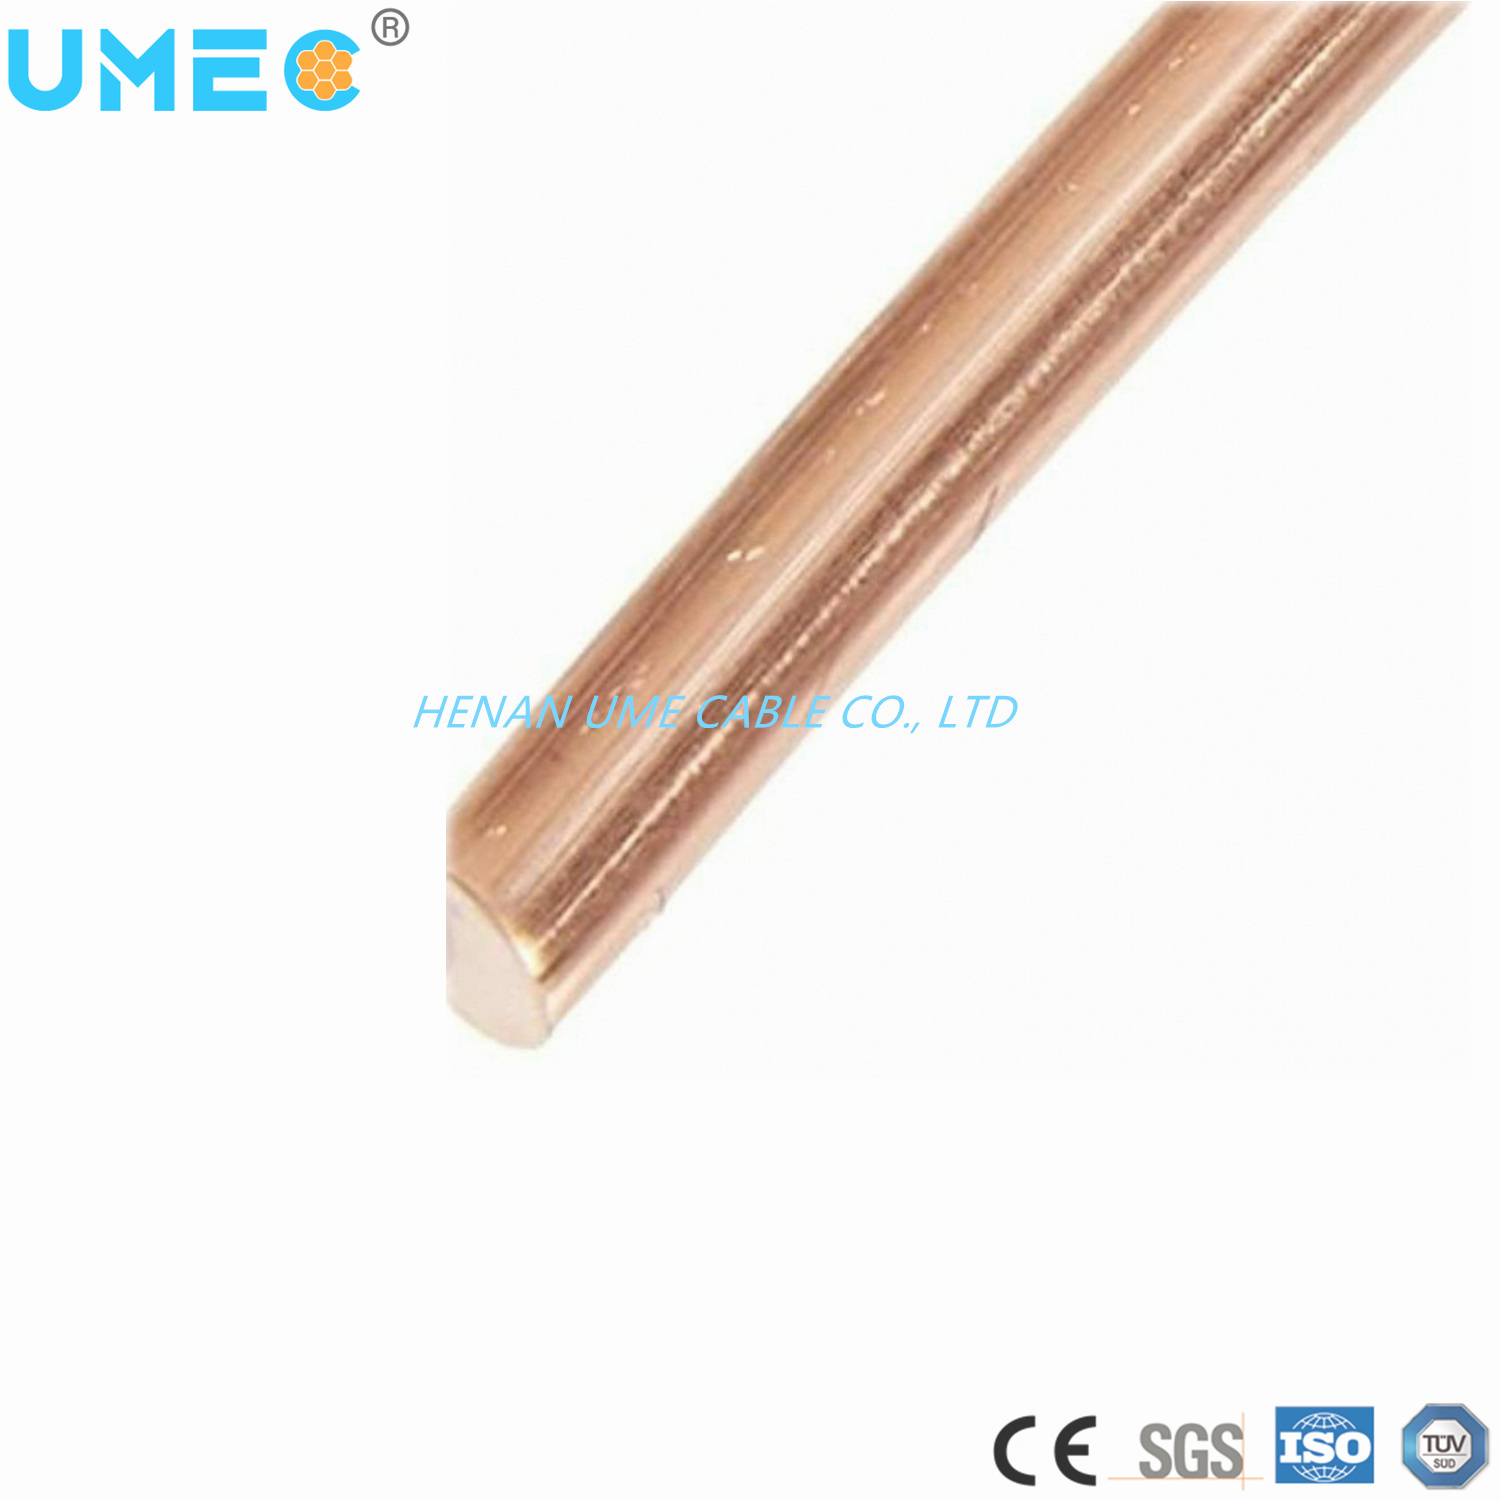 Bare Copper Conductor Solid or Stranded Wire and Cable